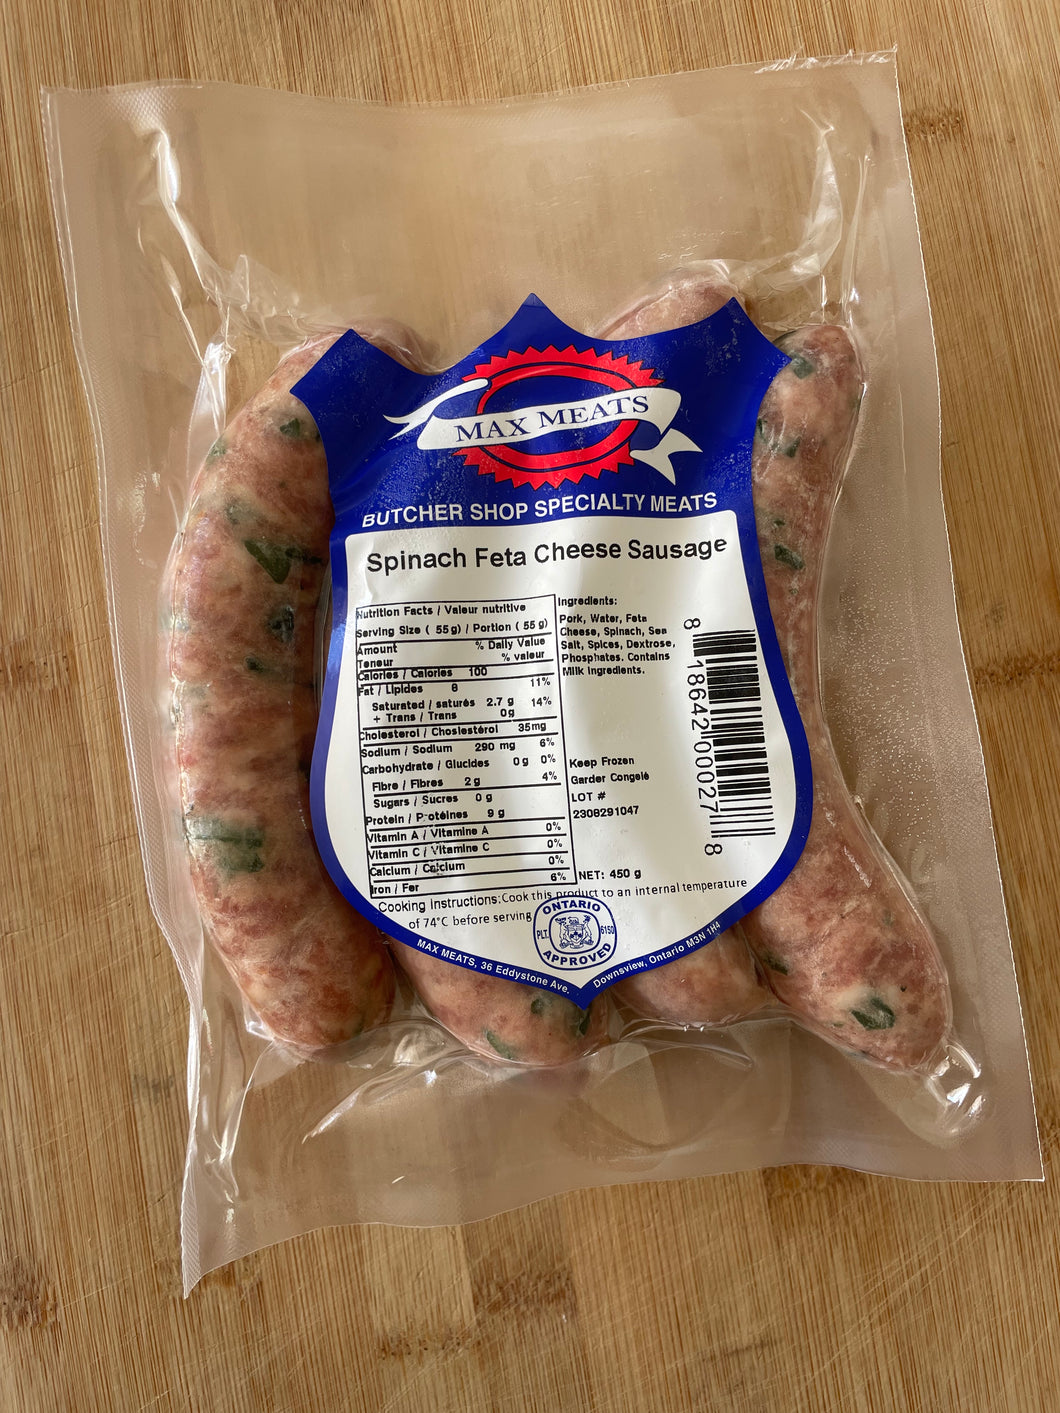 Spinach Feta Sausages